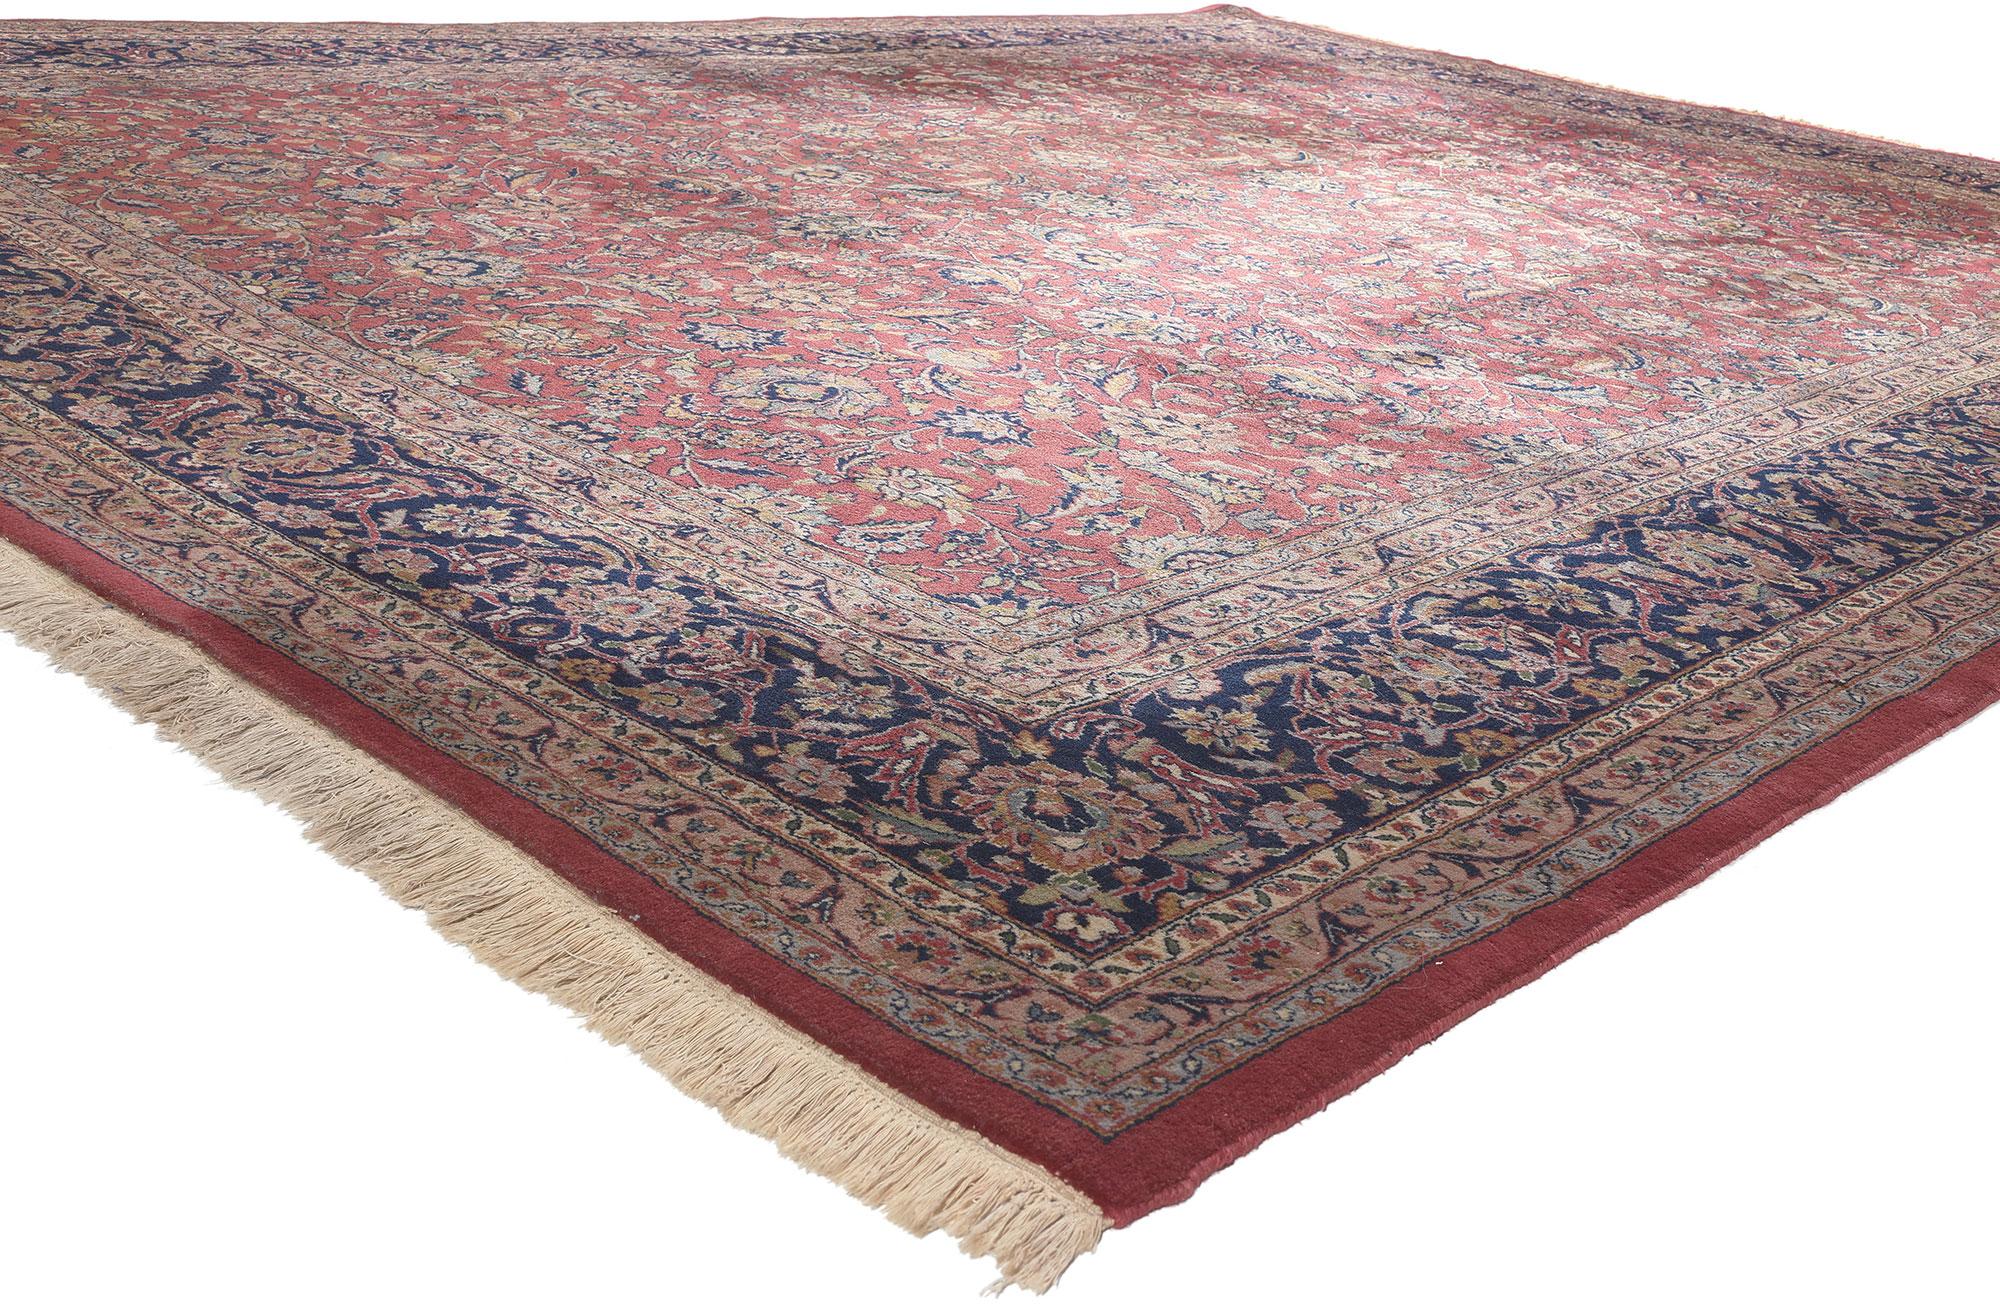 78543 Vintage Indian Tabriz Rug, 09'10 x 13'01.
Emulating traditional sensibility with timeless appeal, this wool vintage Indian Tabriz rug is a captivating vision of woven beauty. The decorative botanical detailing and sophisticated color palette